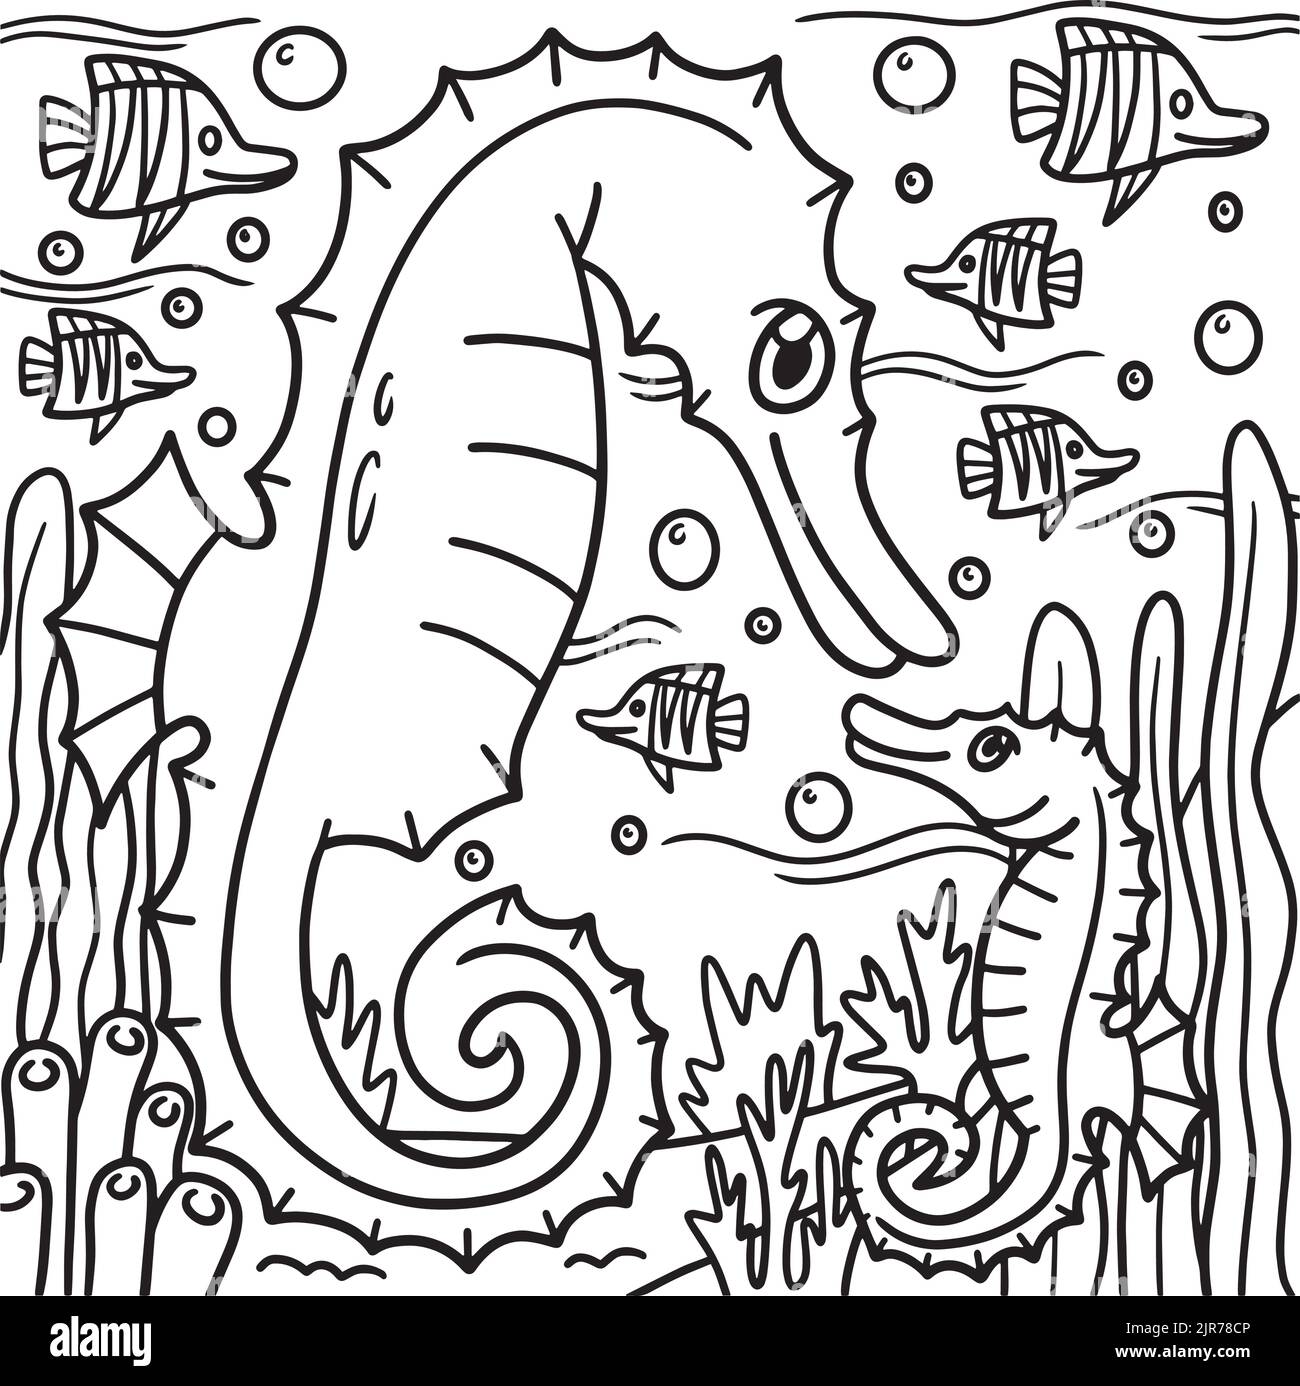 Sea Horse Coloring Page for Kids Stock Vector